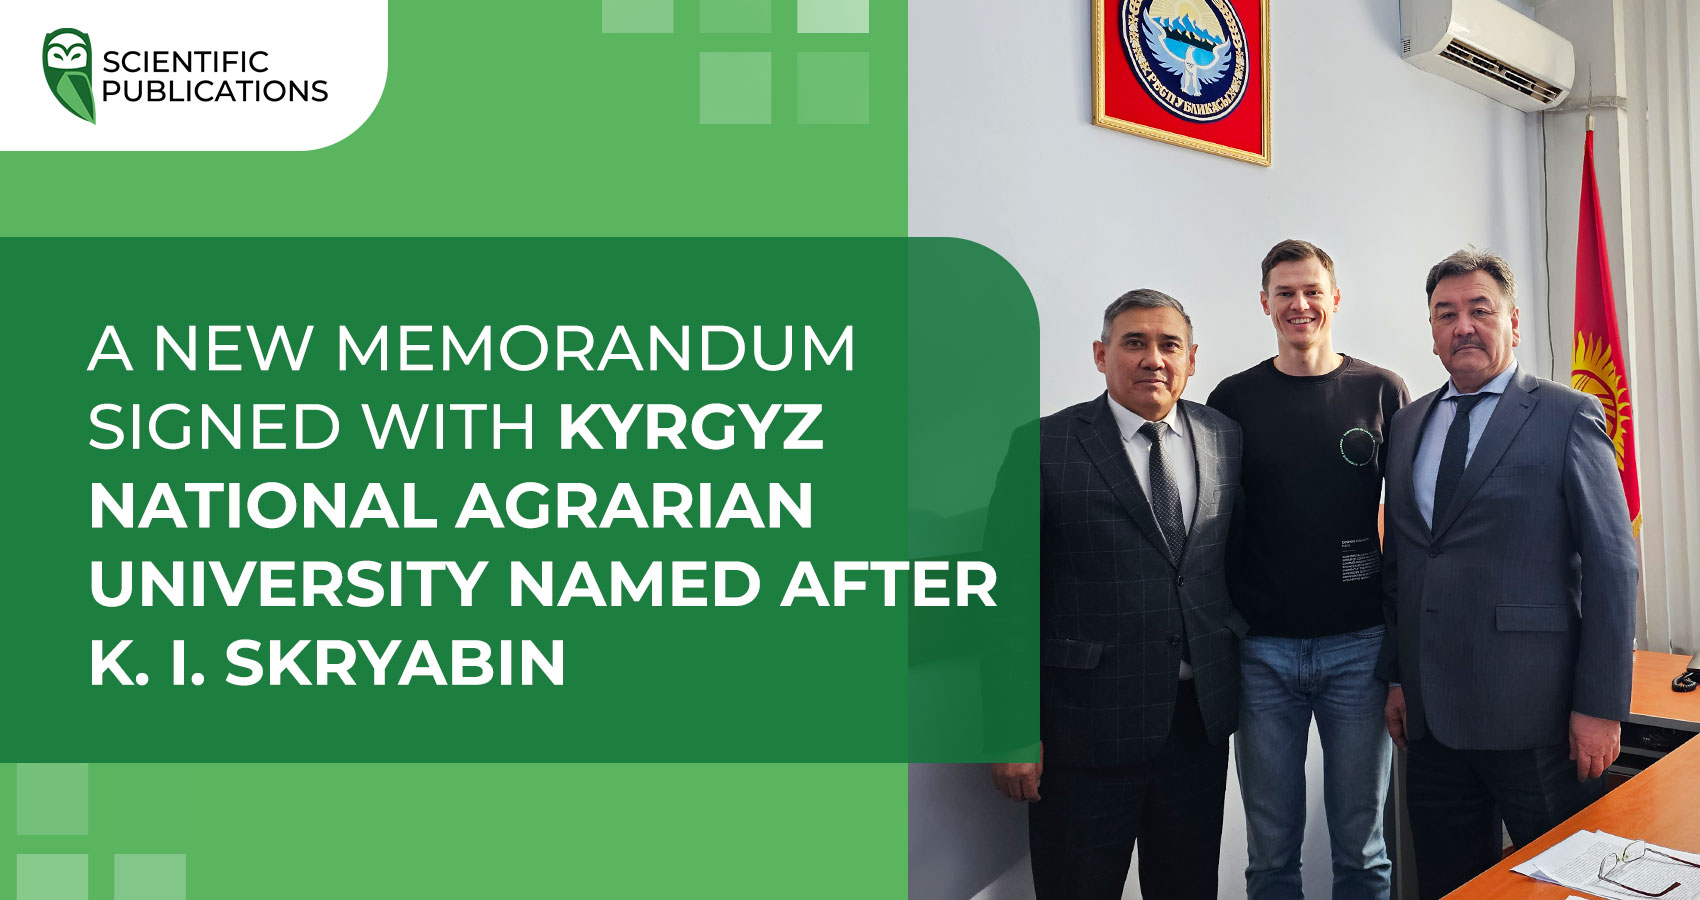 A memorandum has been signed with the Kyrgyz National Agrarian University named after K.I. Skryabin